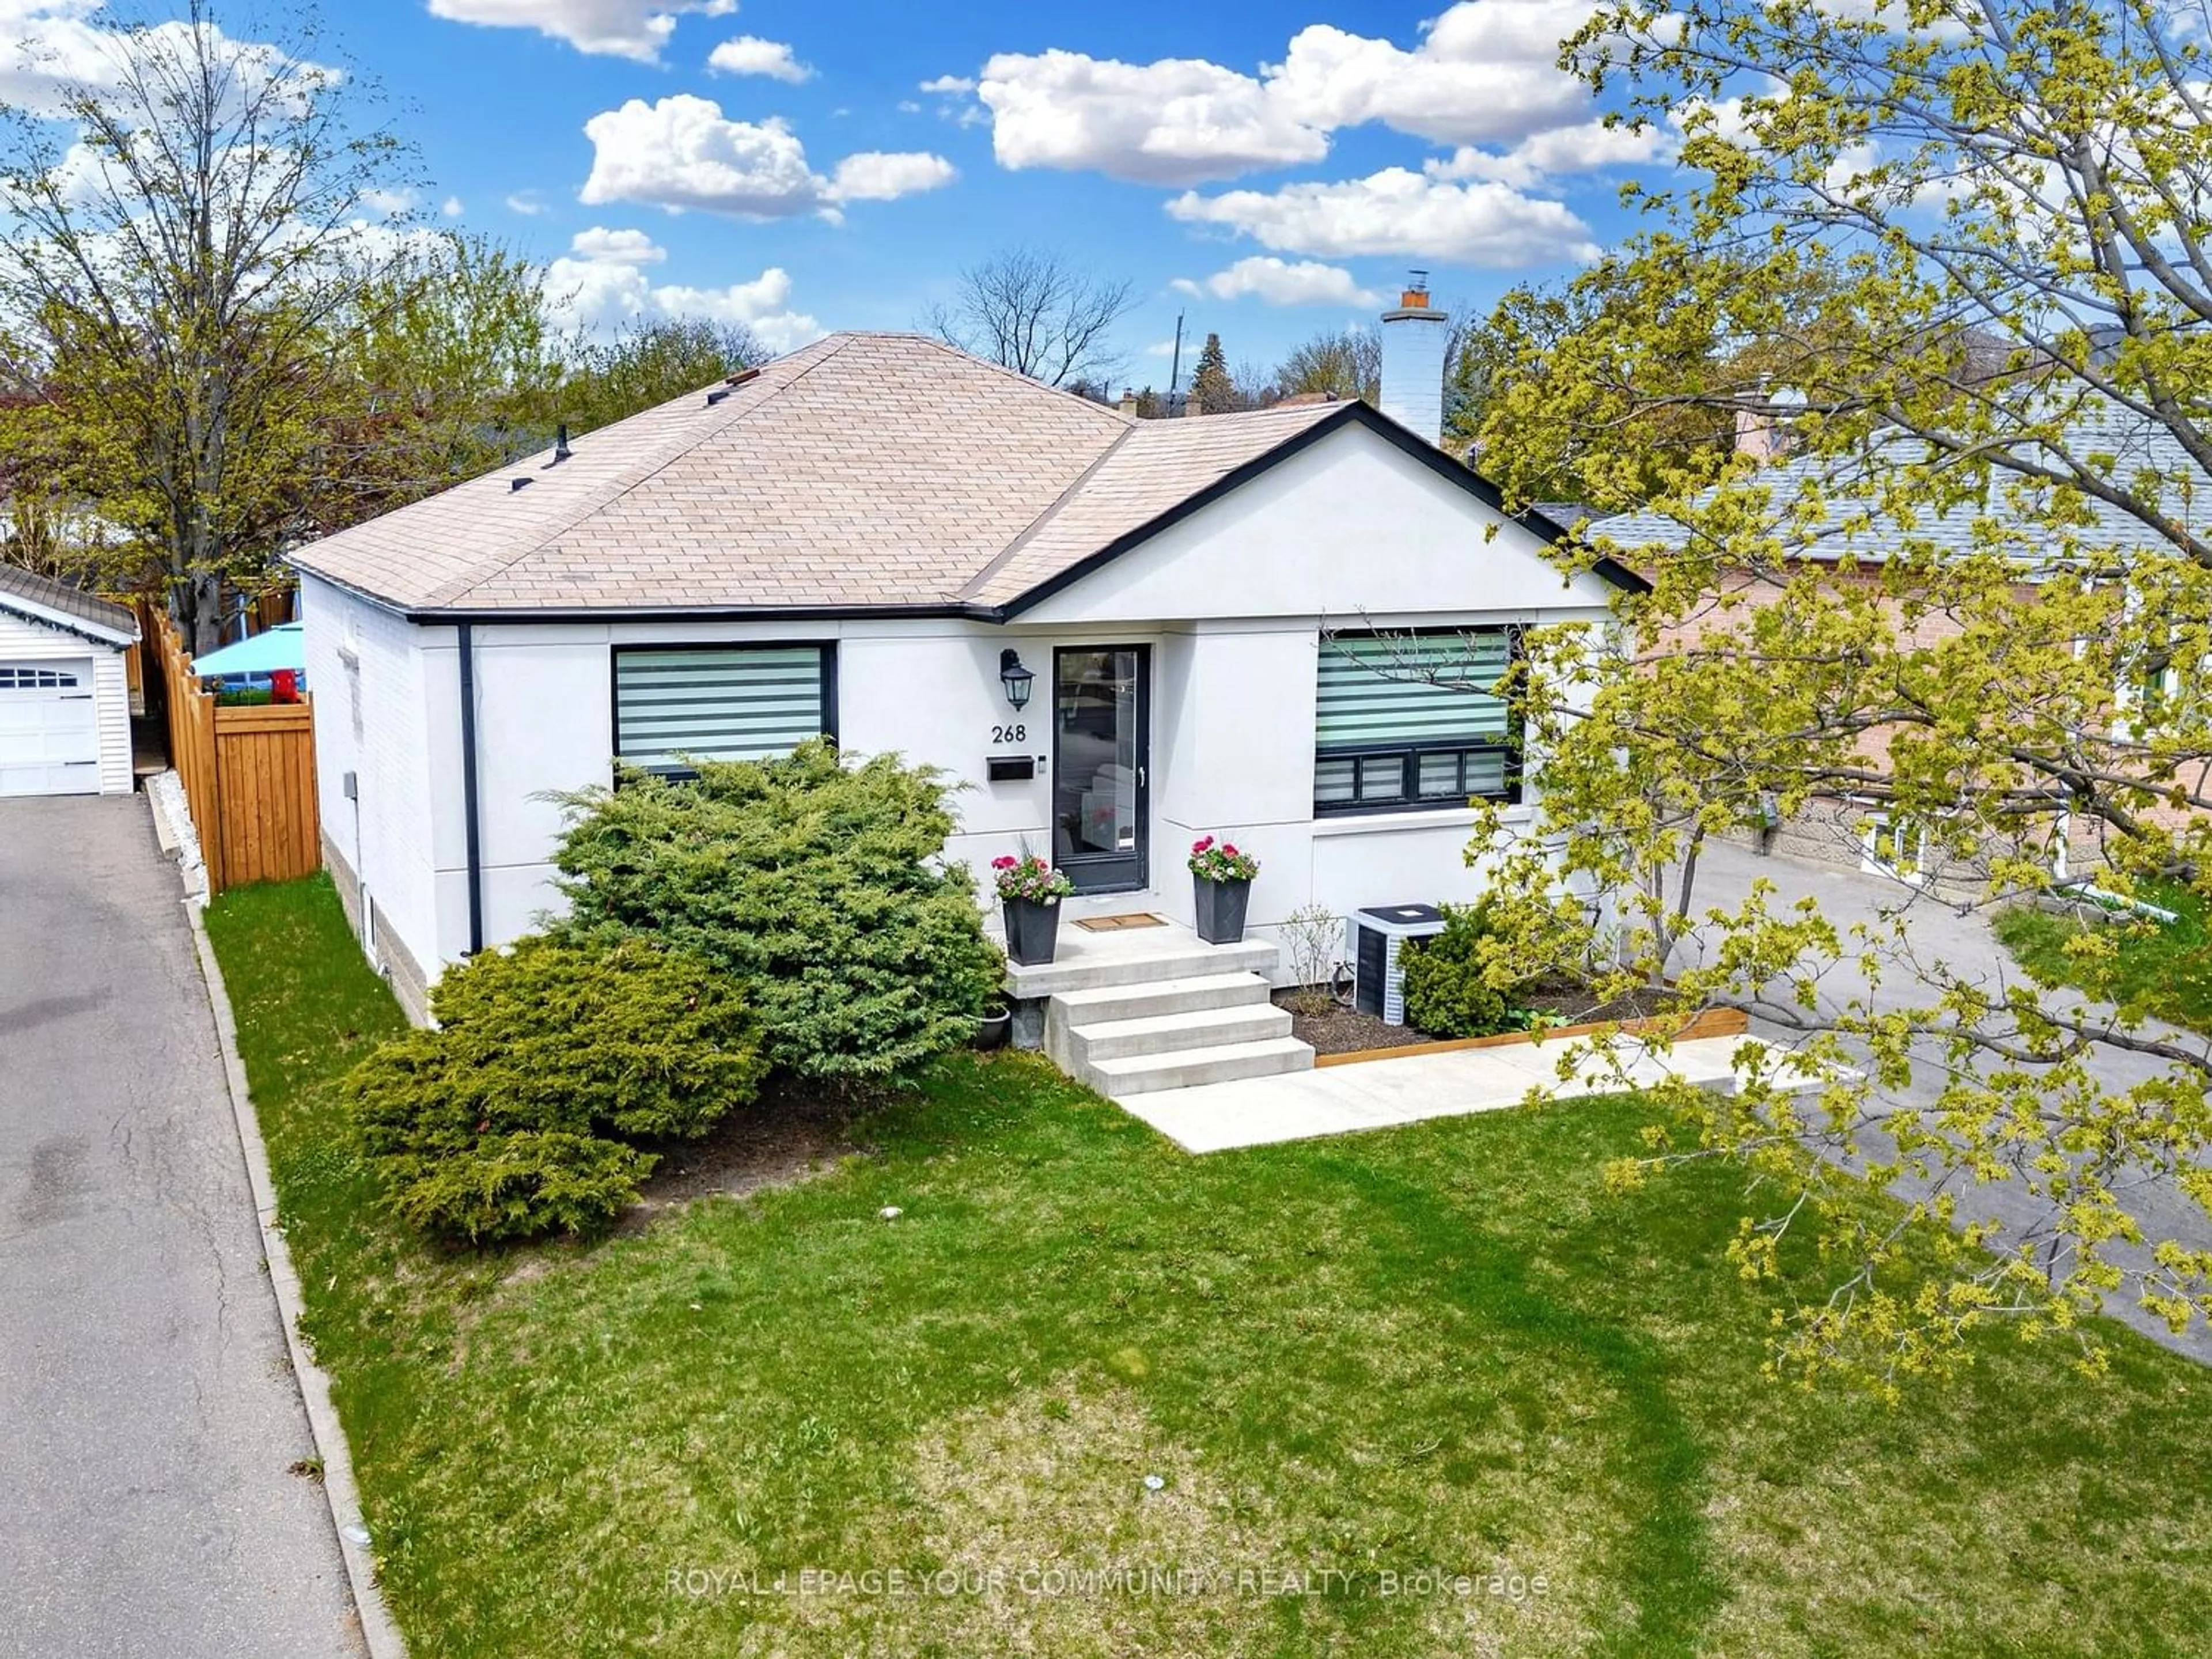 Frontside or backside of a home for 268 Epsom Downs Dr, Toronto Ontario M3M 1T4